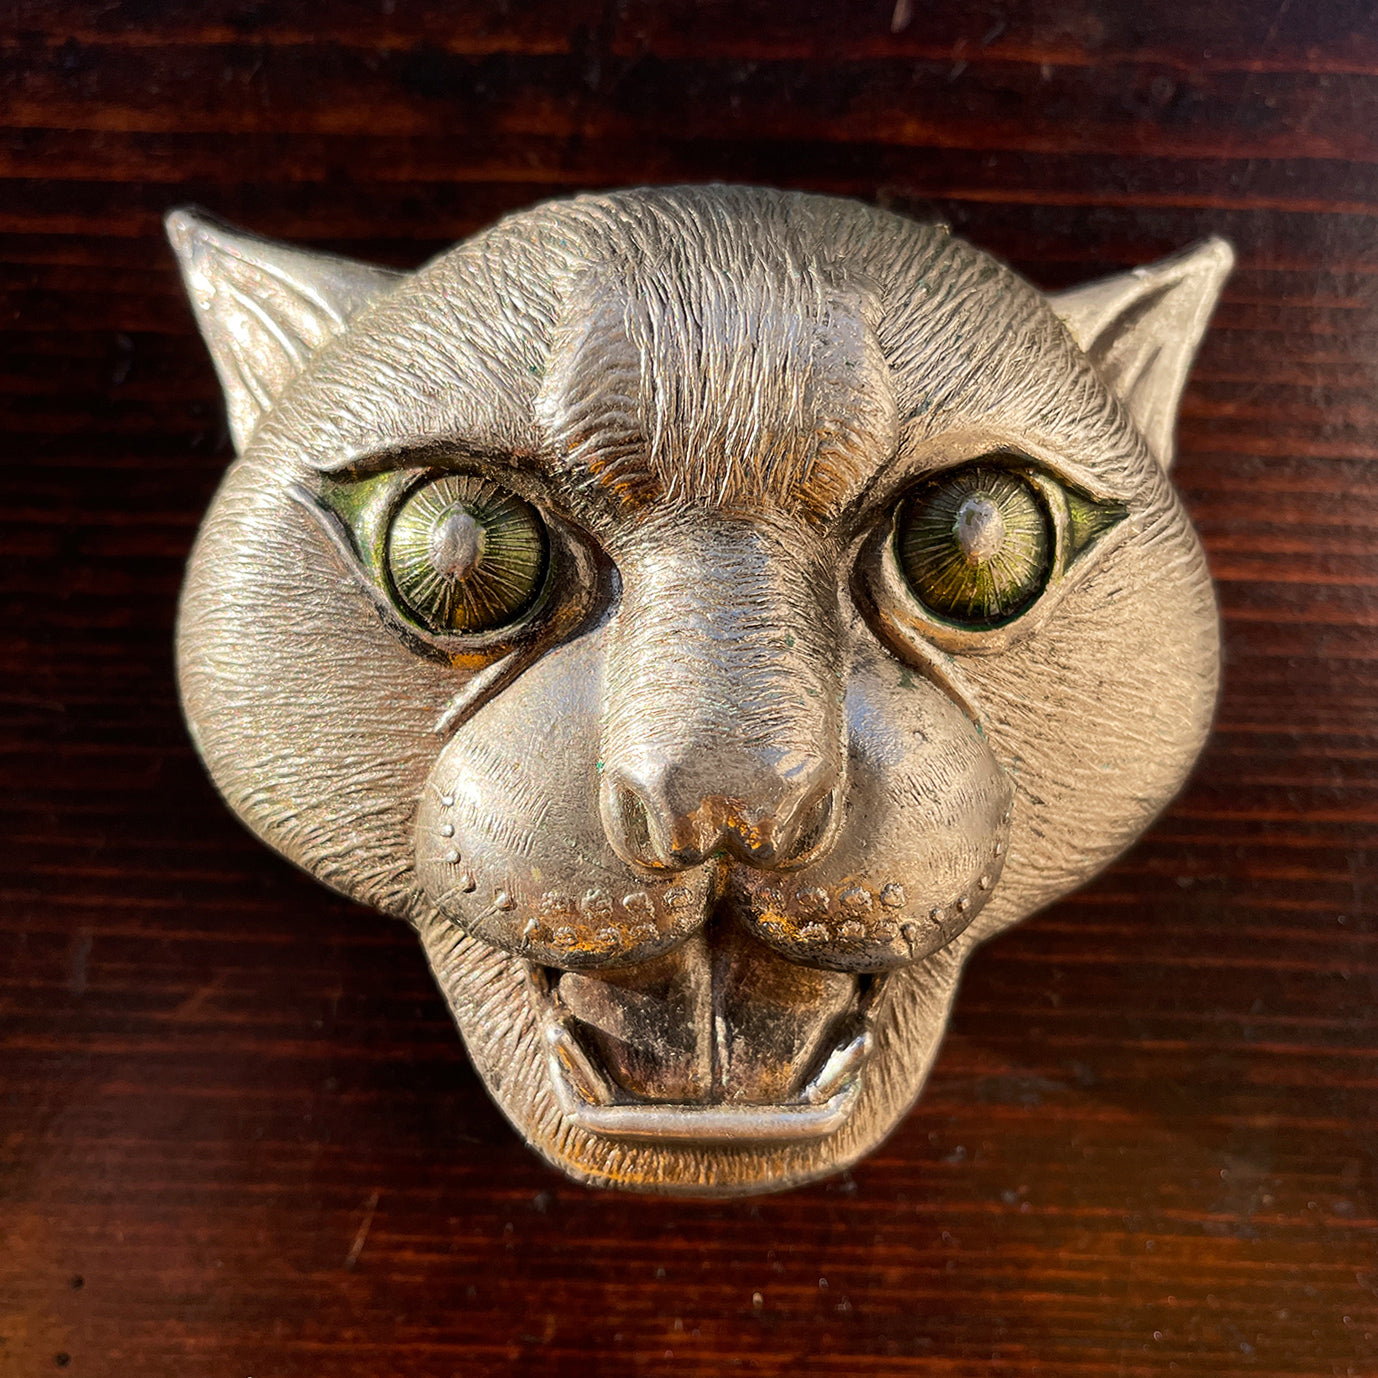 A very cool cast metal Panther Belt Buckle - SHOP NOW - www.intovintage.co.uk